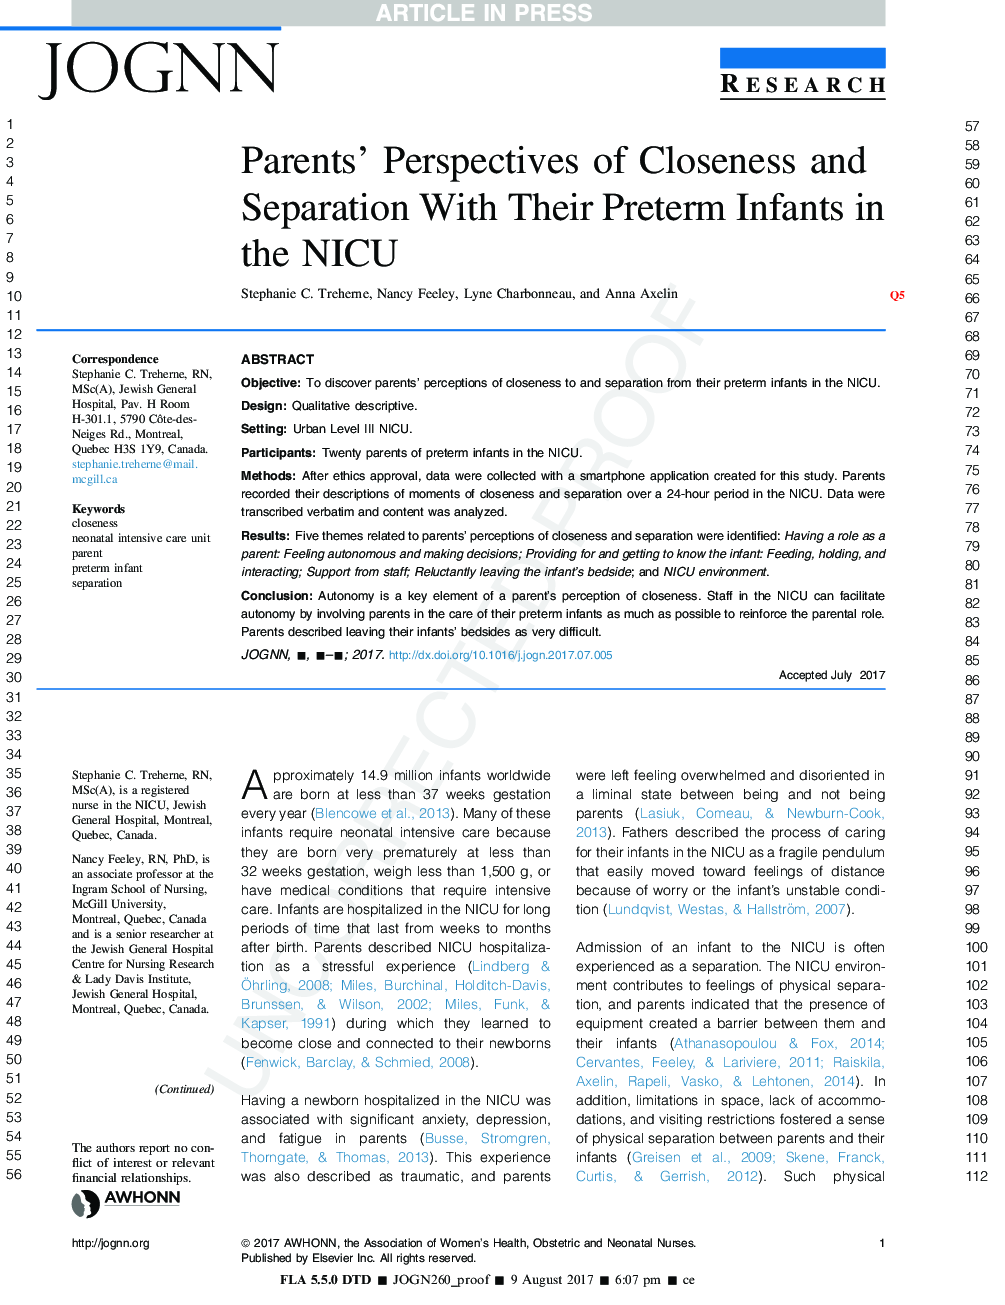 Parents' Perspectives of Closeness and Separation With Their Preterm Infants in the NICU